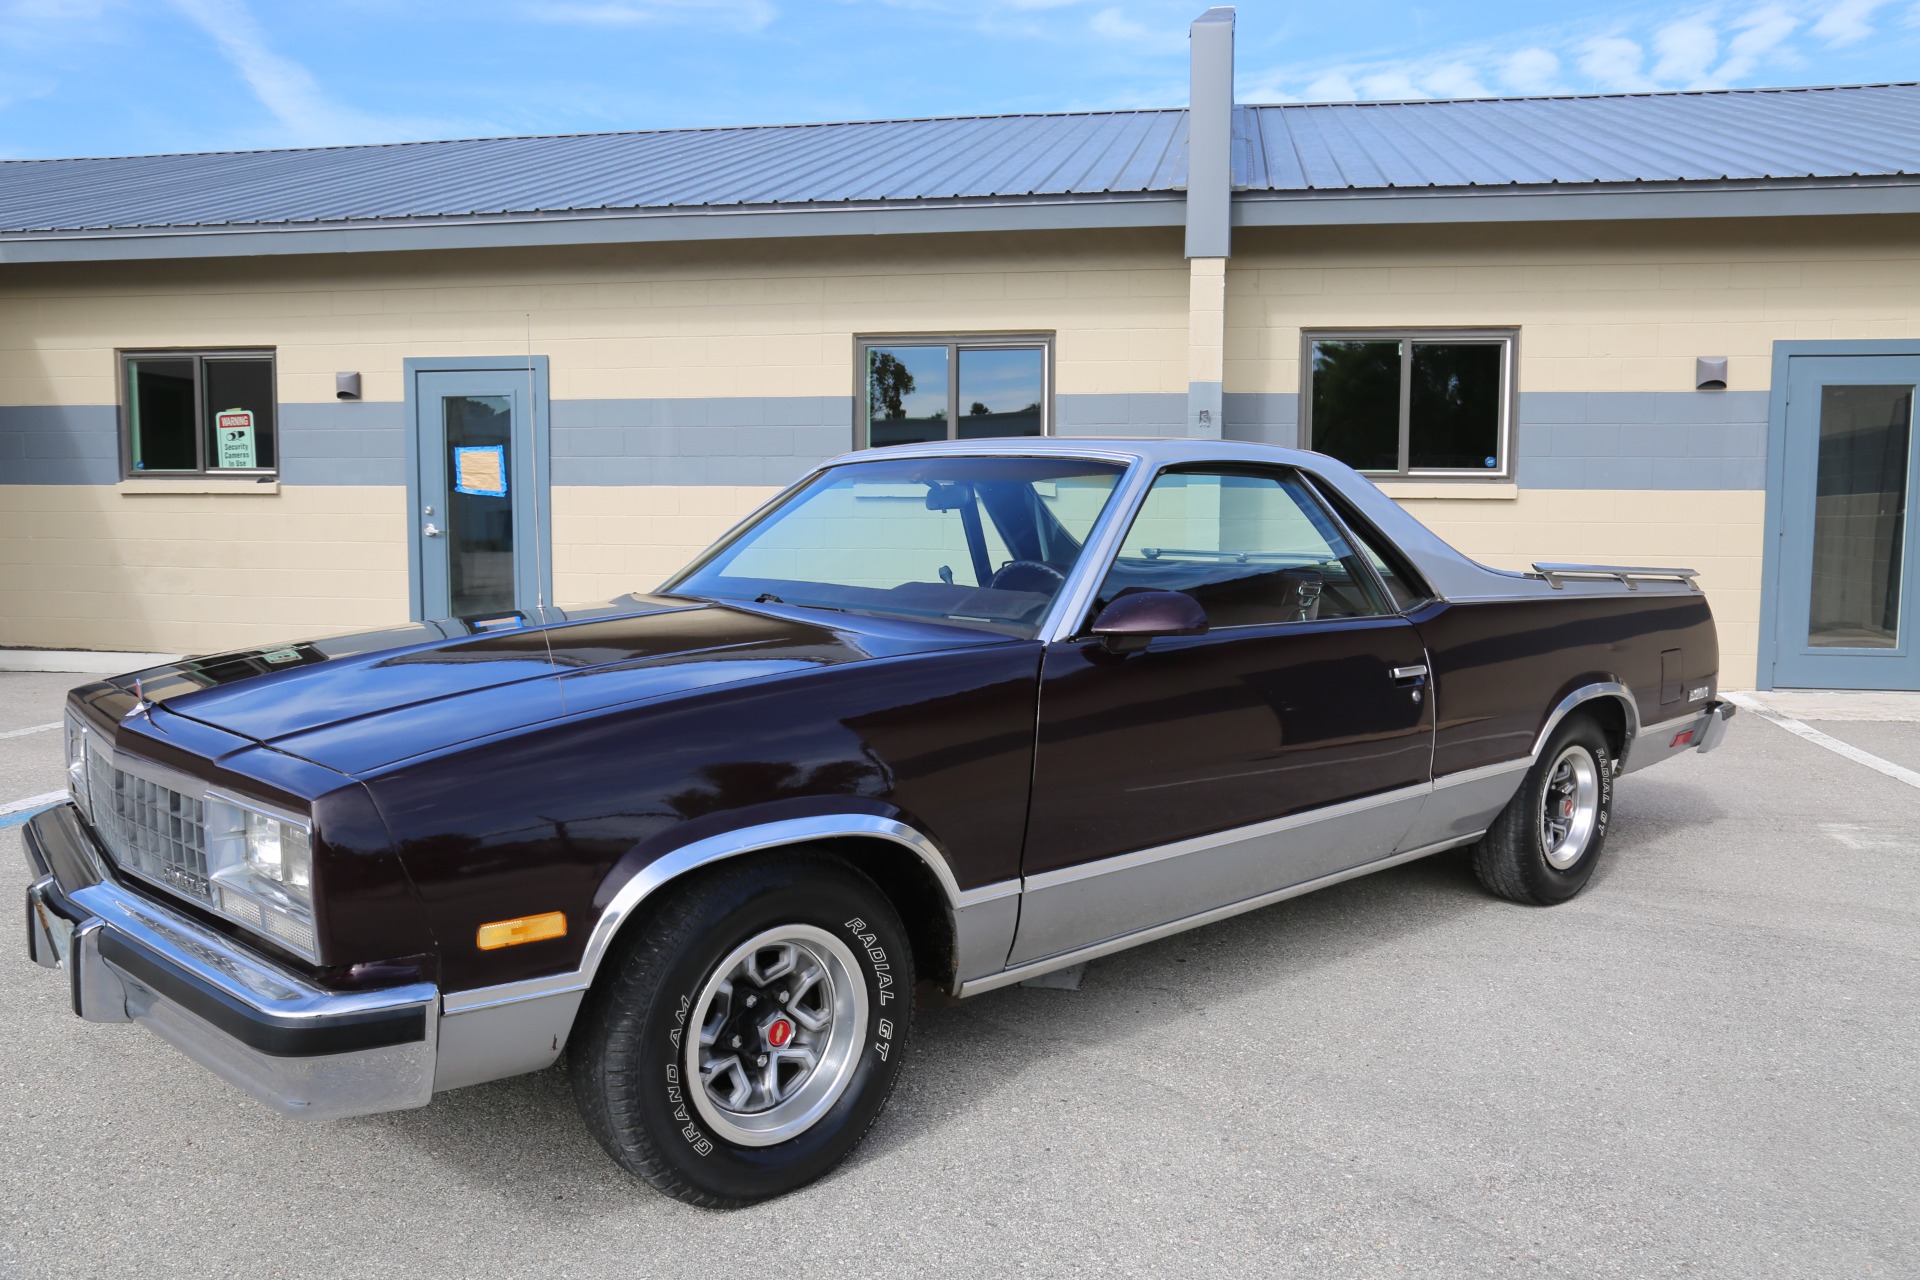 Used 1986 Chevrolet El Camino Conquesta for sale Sold at Muscle Cars for Sale Inc. in Fort Myers FL 33912 1